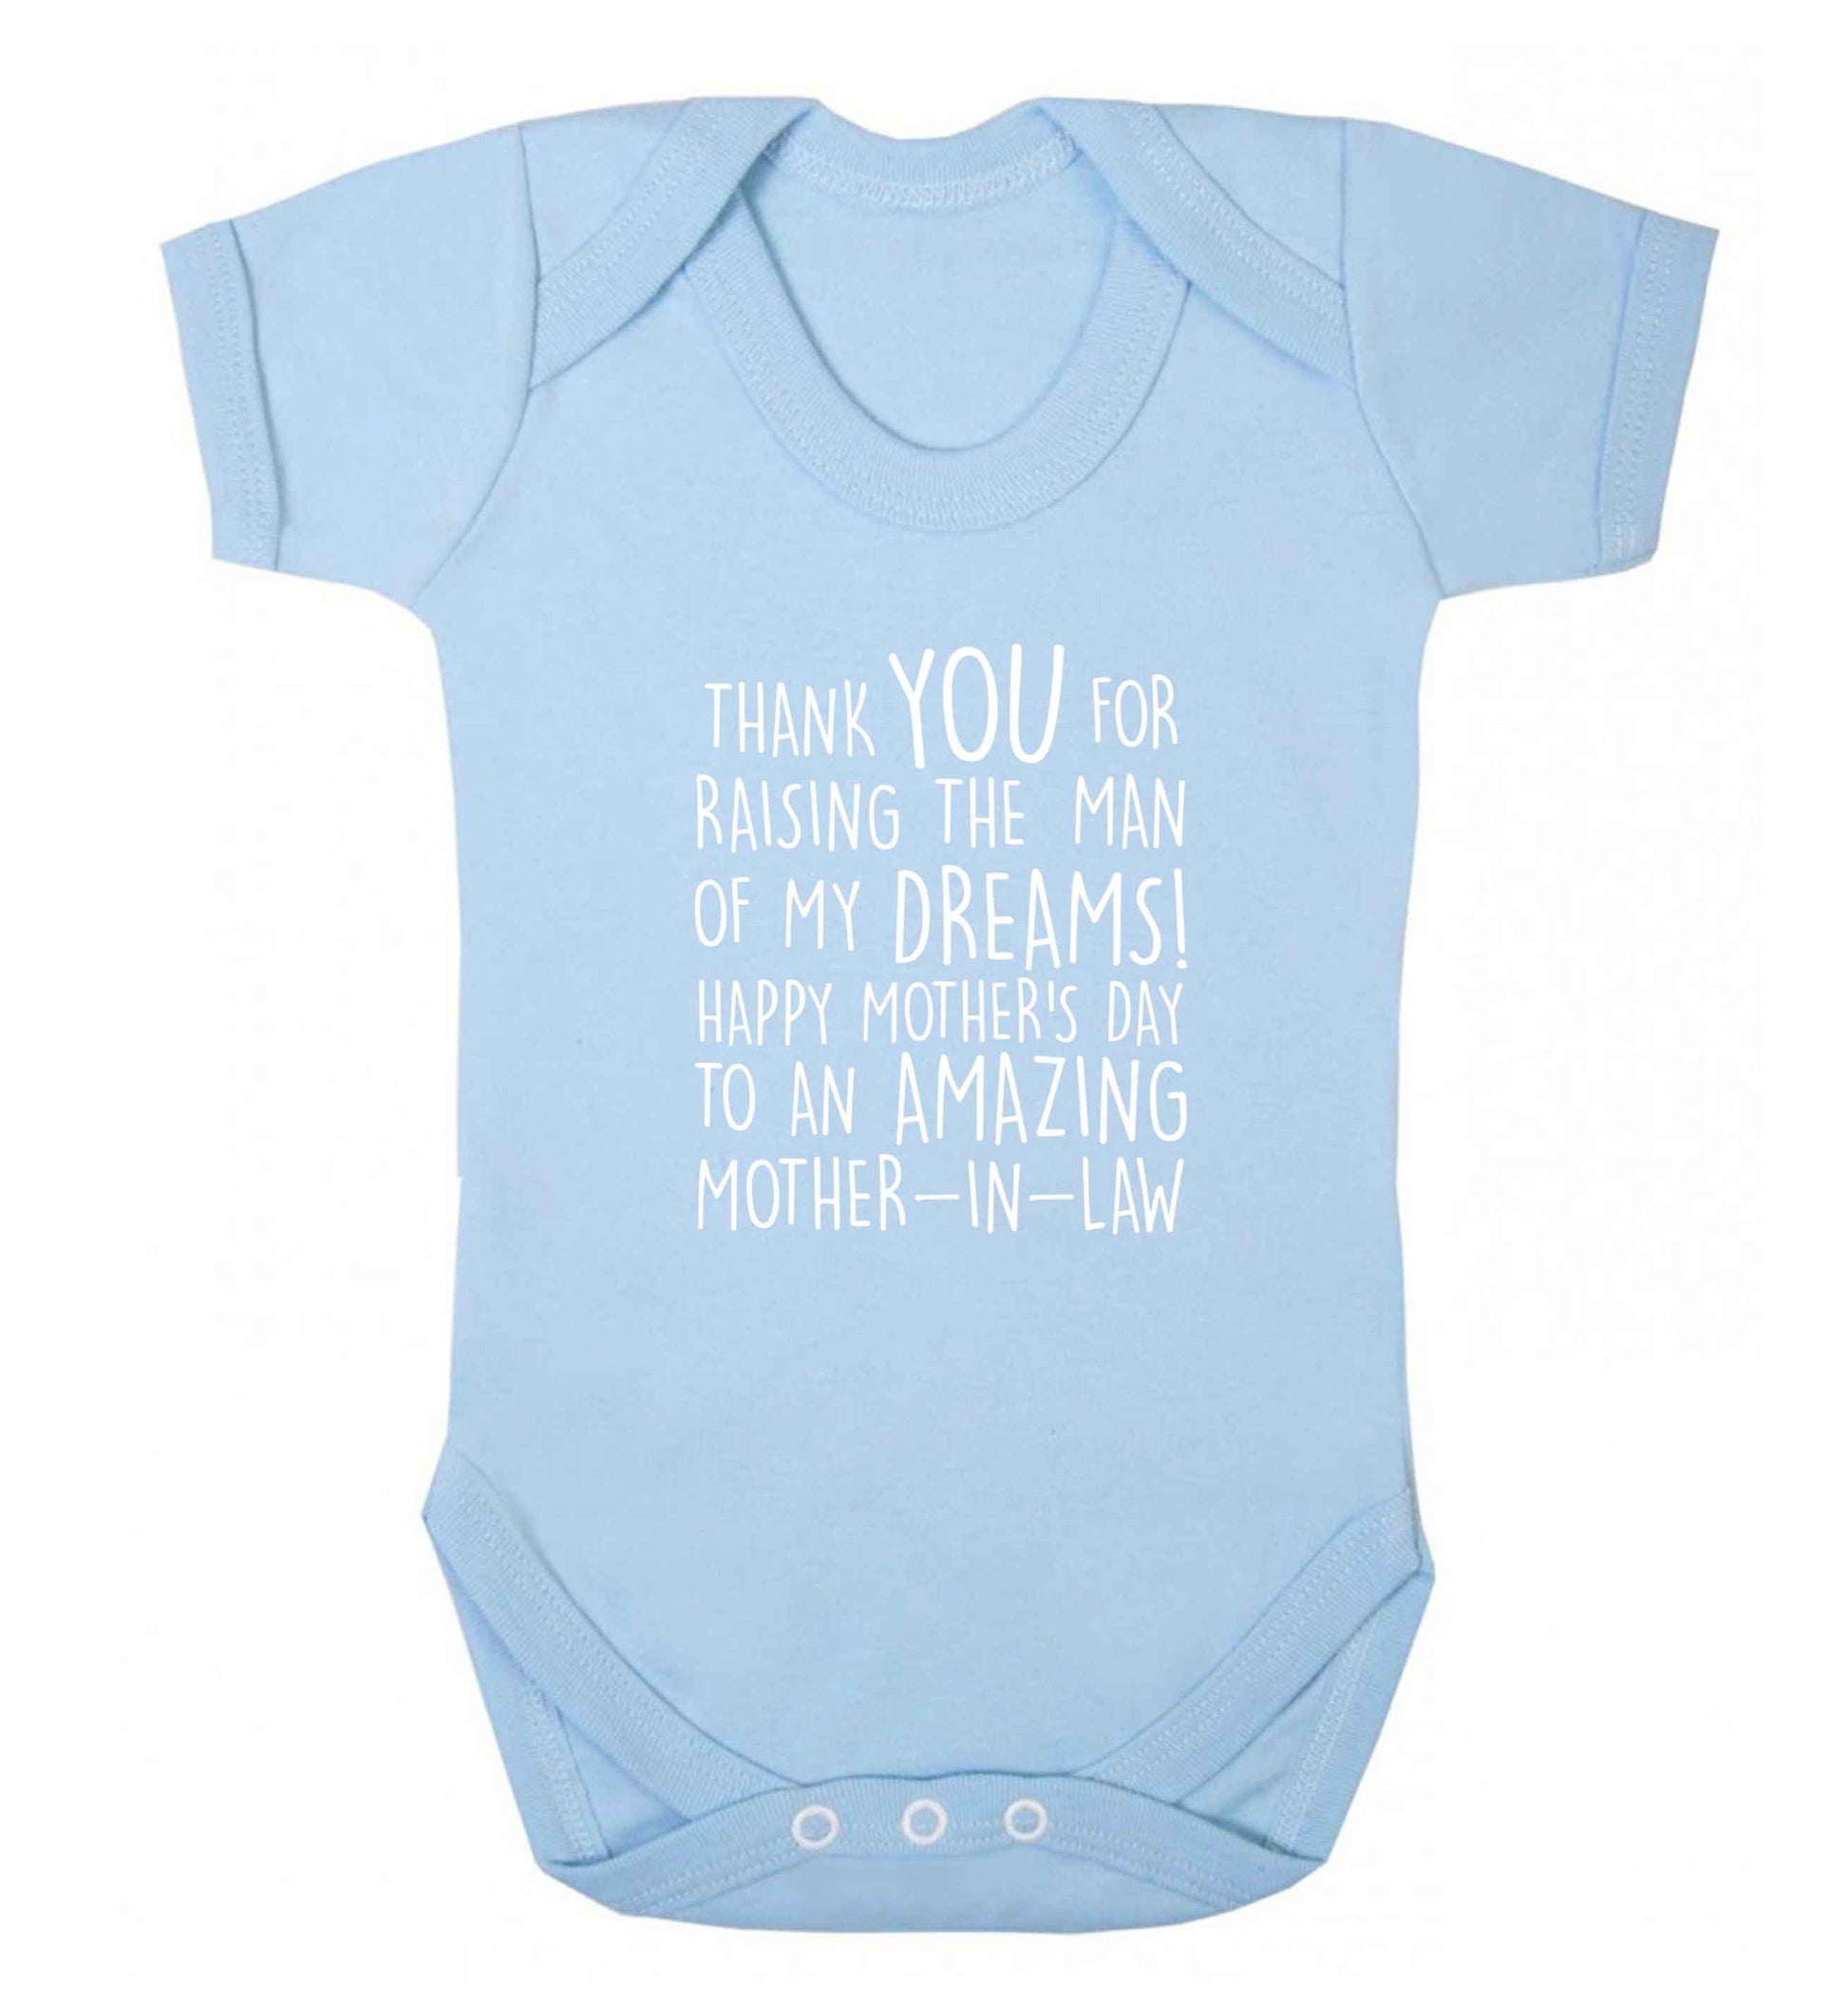 Raising the man of my dreams mother's day mother-in-law baby vest pale blue 18-24 months